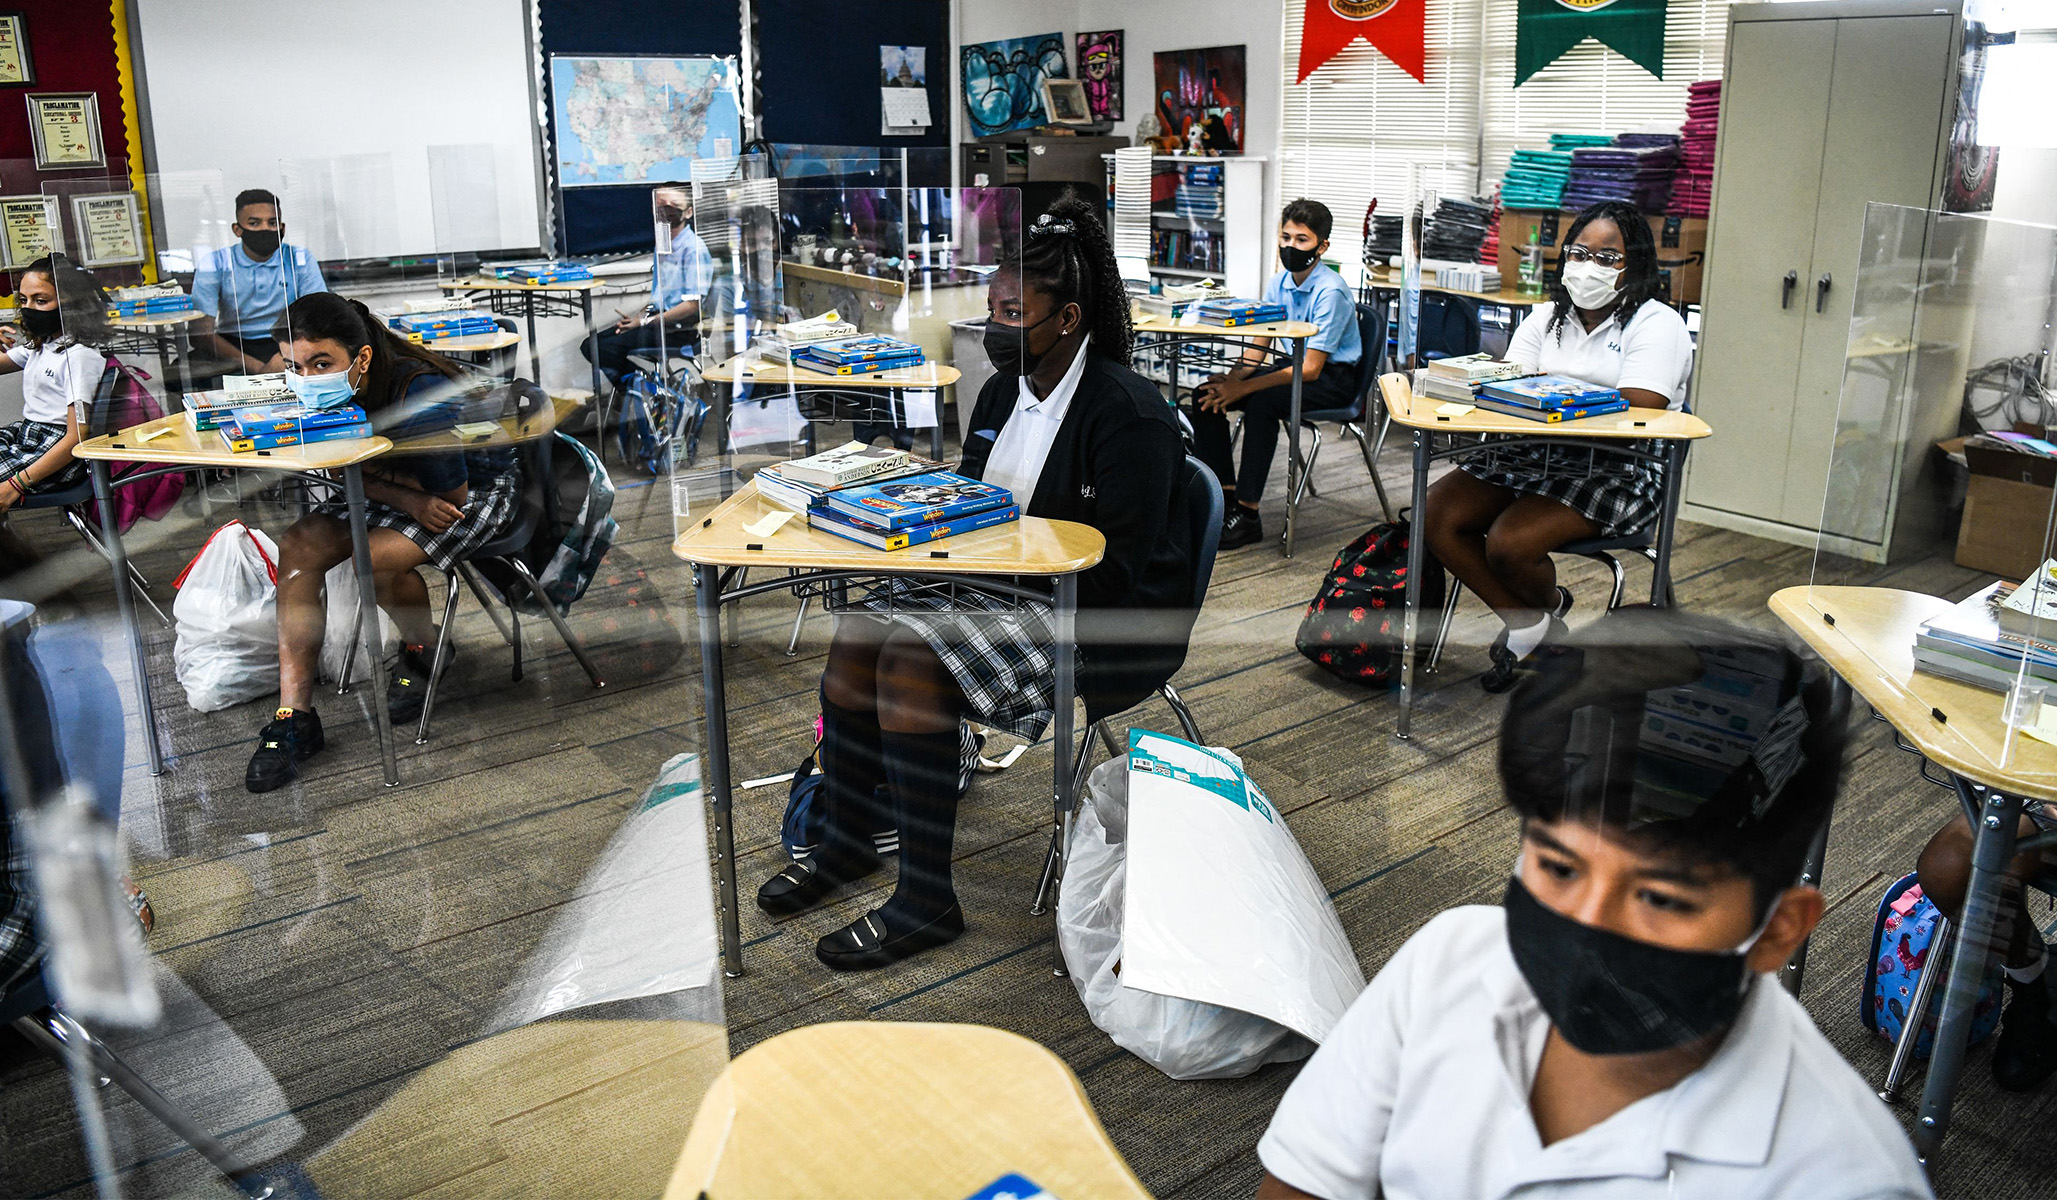 It’s Time for America’s Cities to Go All-In on School Choice